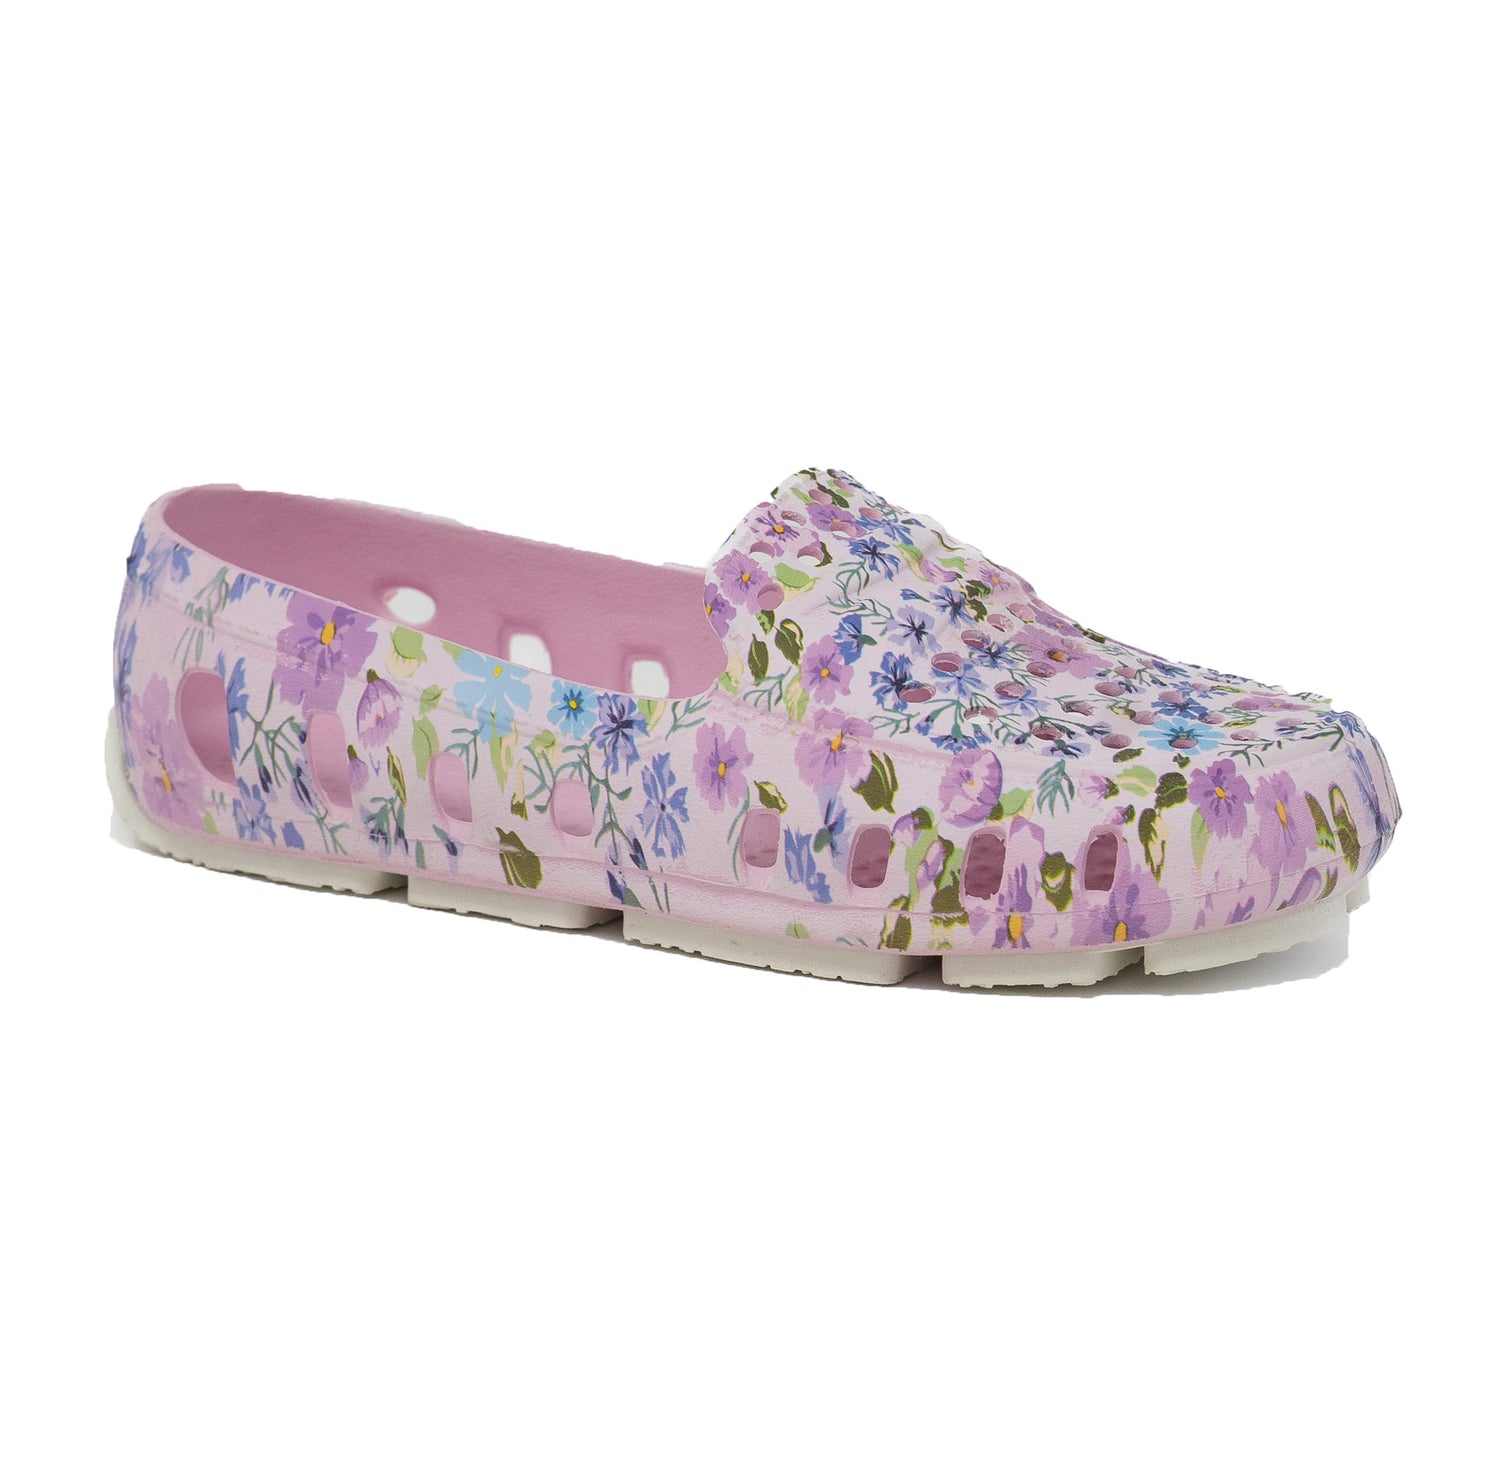 PINK FLORAL MULTI - WOMENS - FINAL SALE